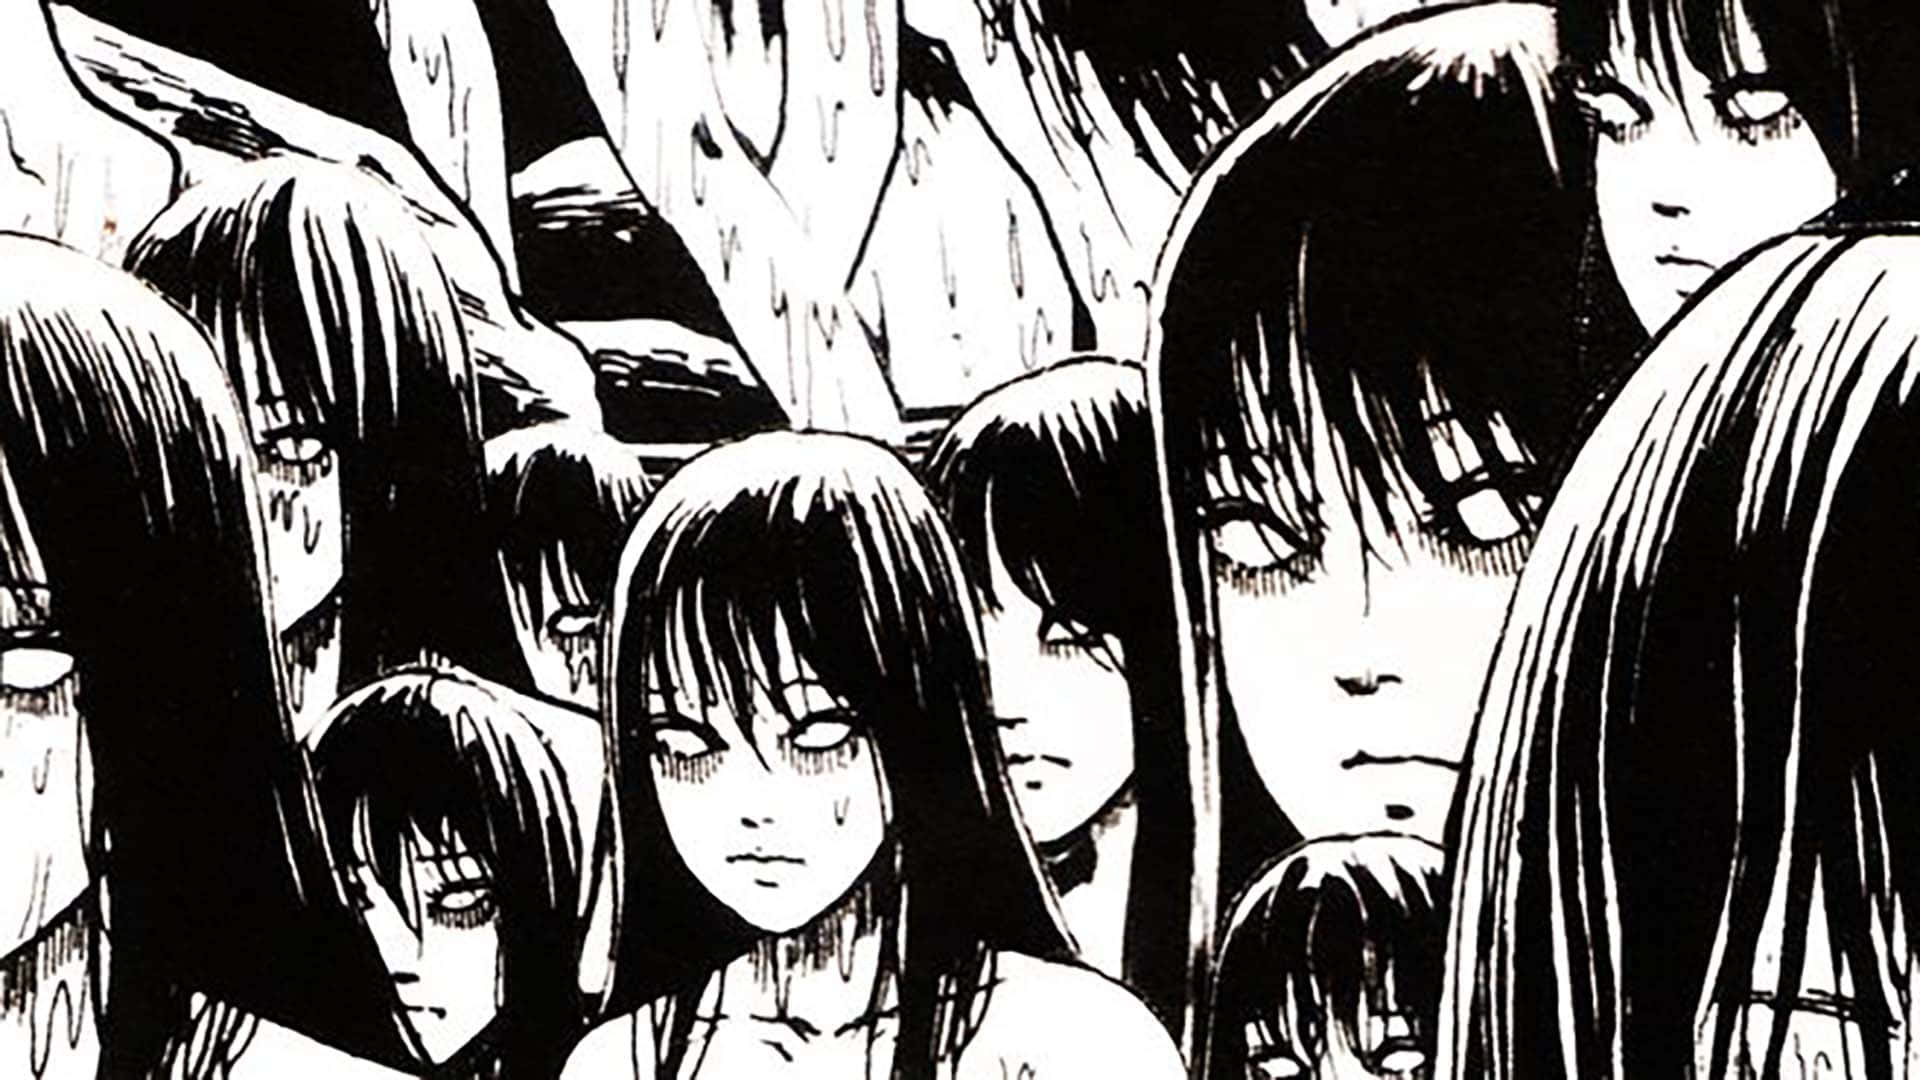 Tomie emerging from the darkness Wallpaper